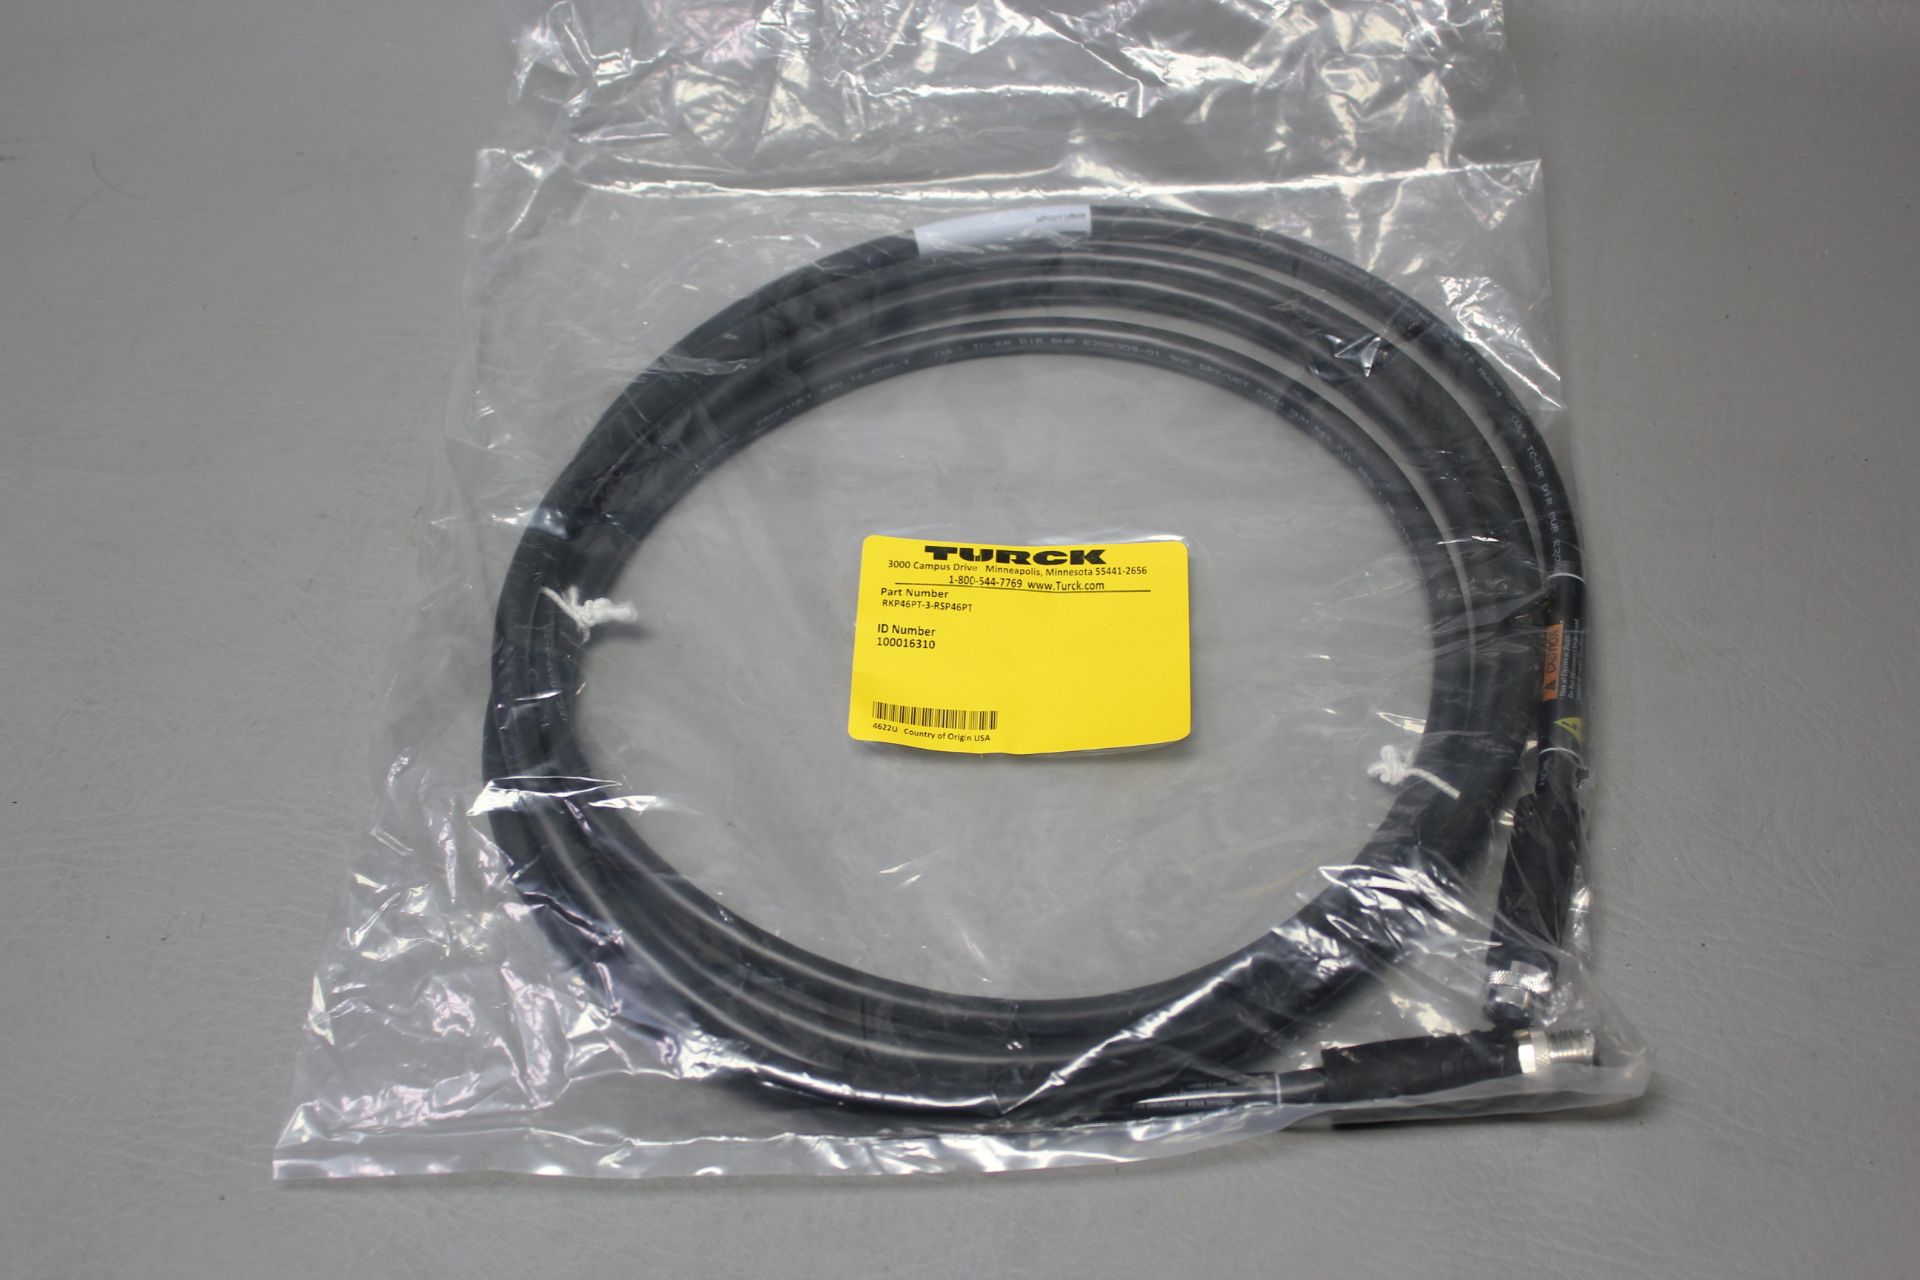 NEW TURCK CABLE ASSEMBLY